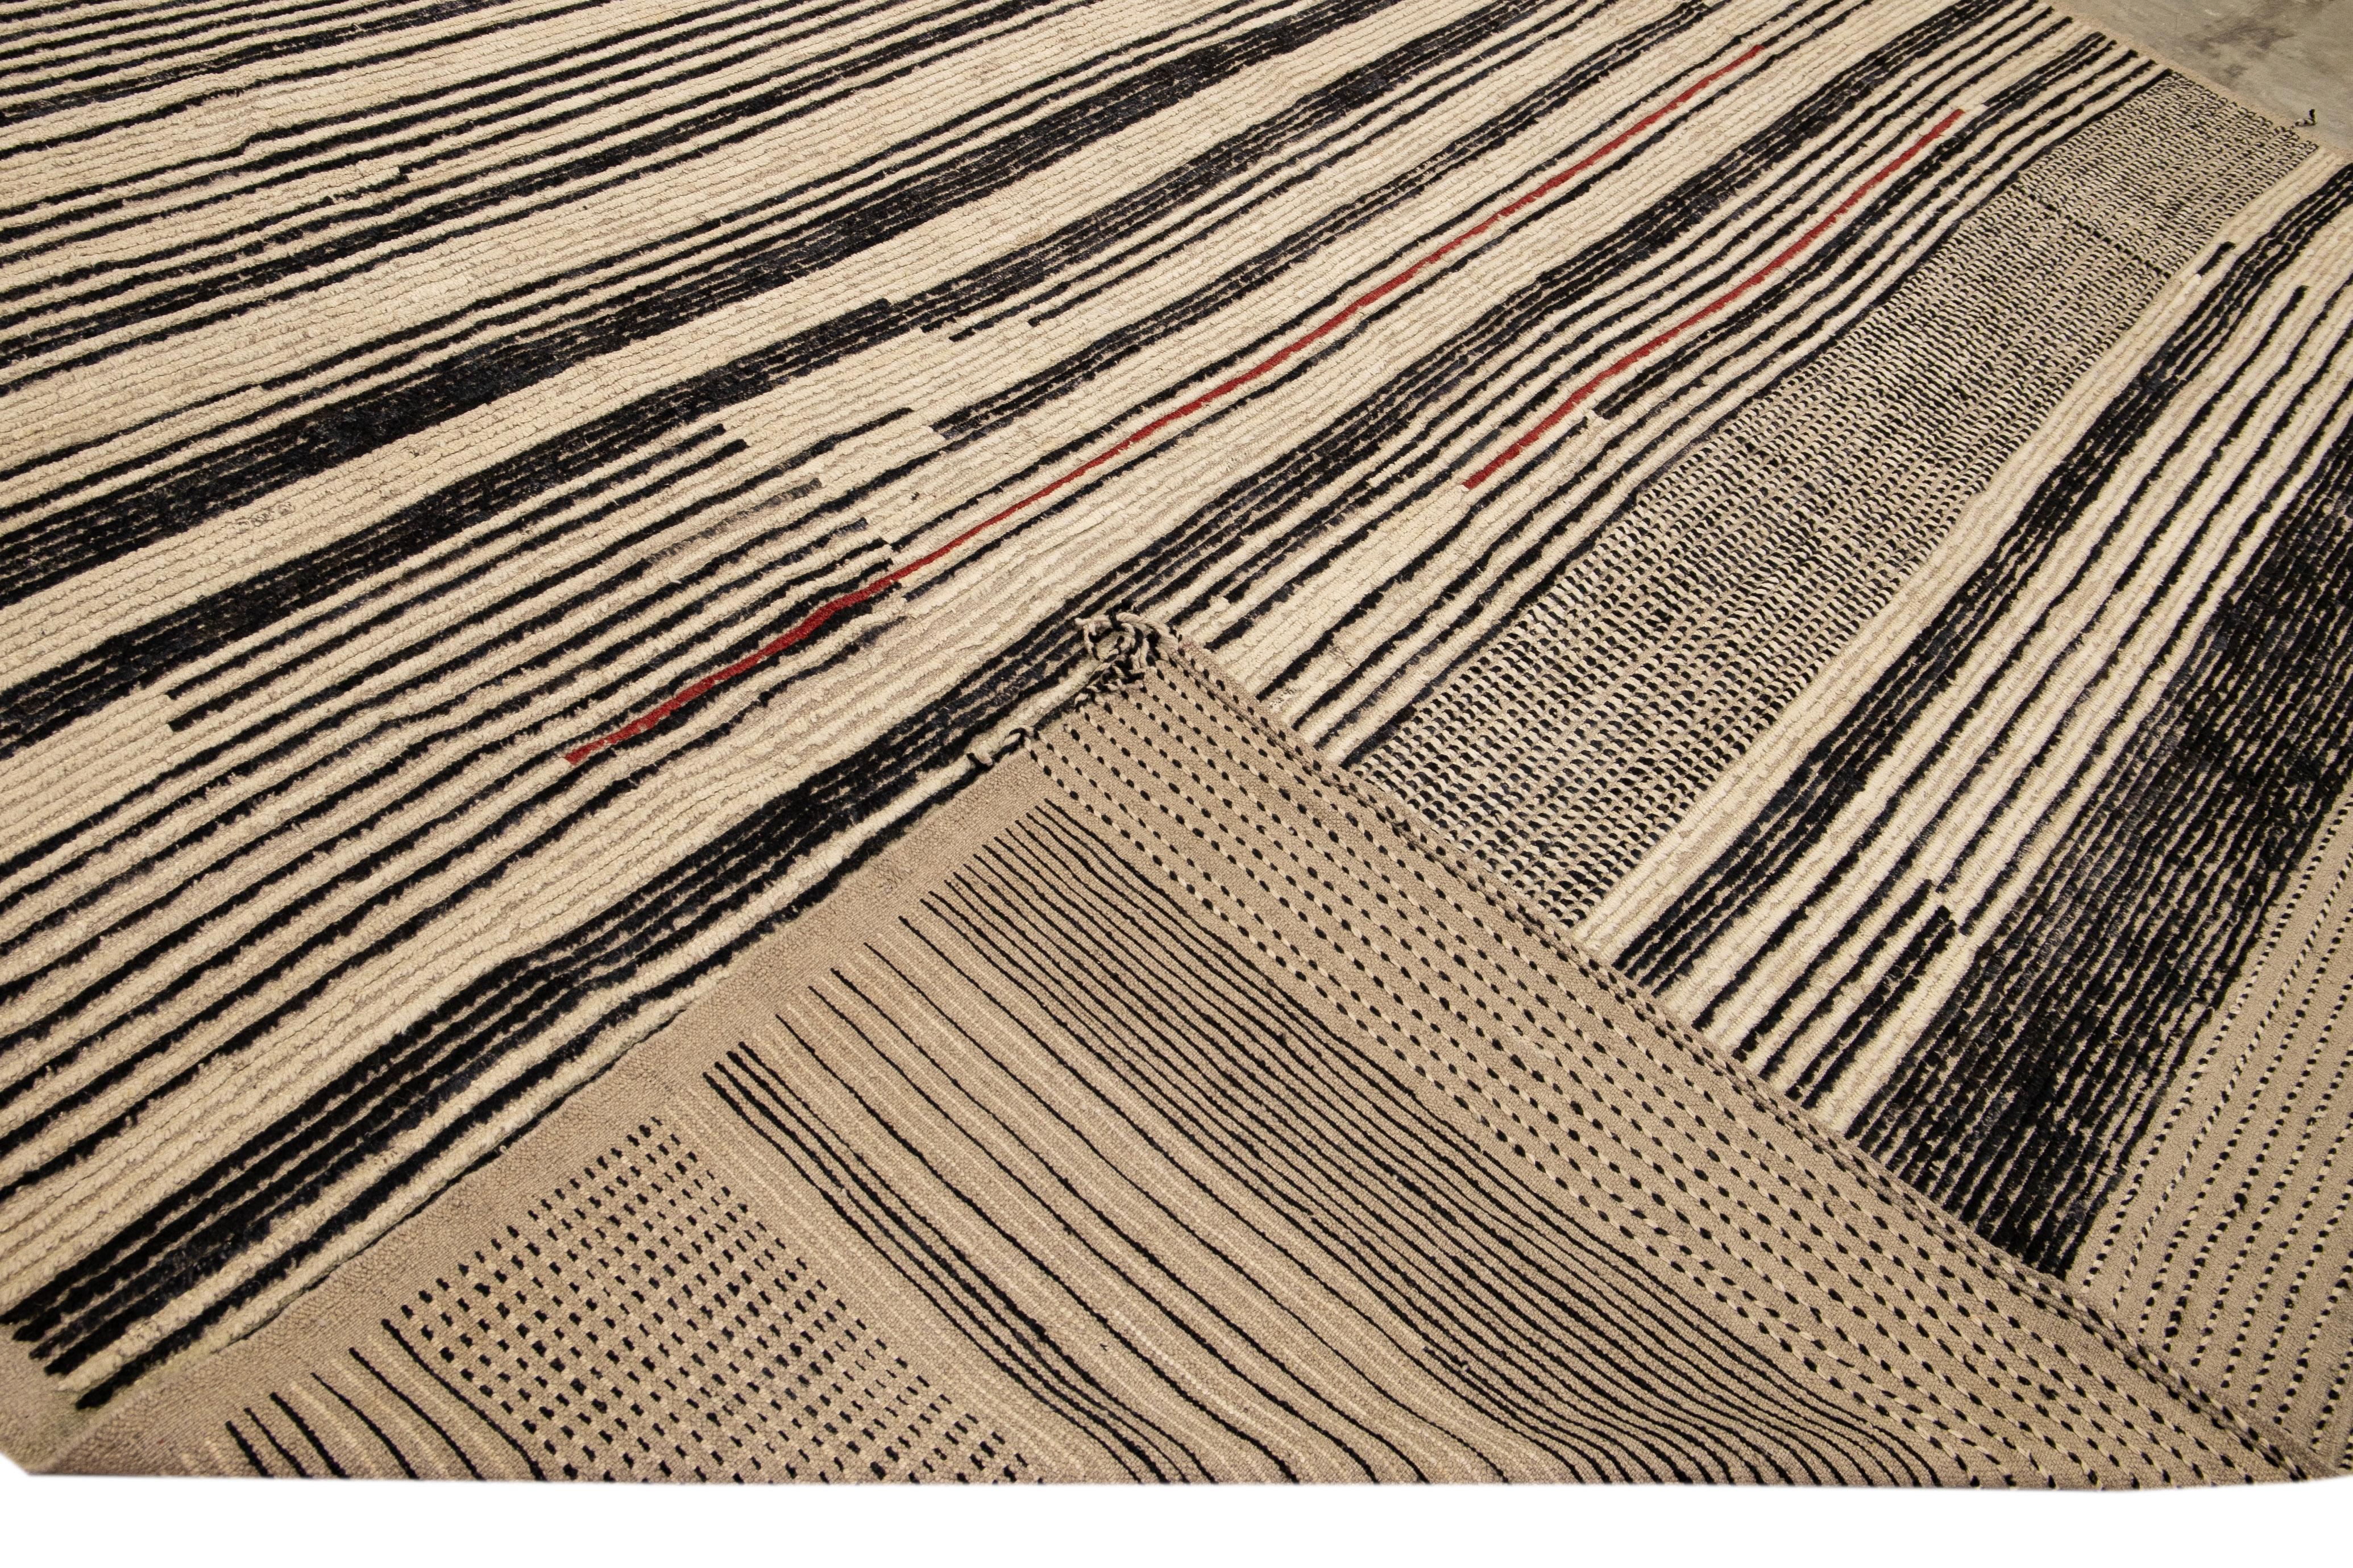 Beautiful Moroccan style handmade wool rug with a beige field. This Modern rug has black accents featuring a gorgeous all-over striped motif.

This rug measures: 12'5